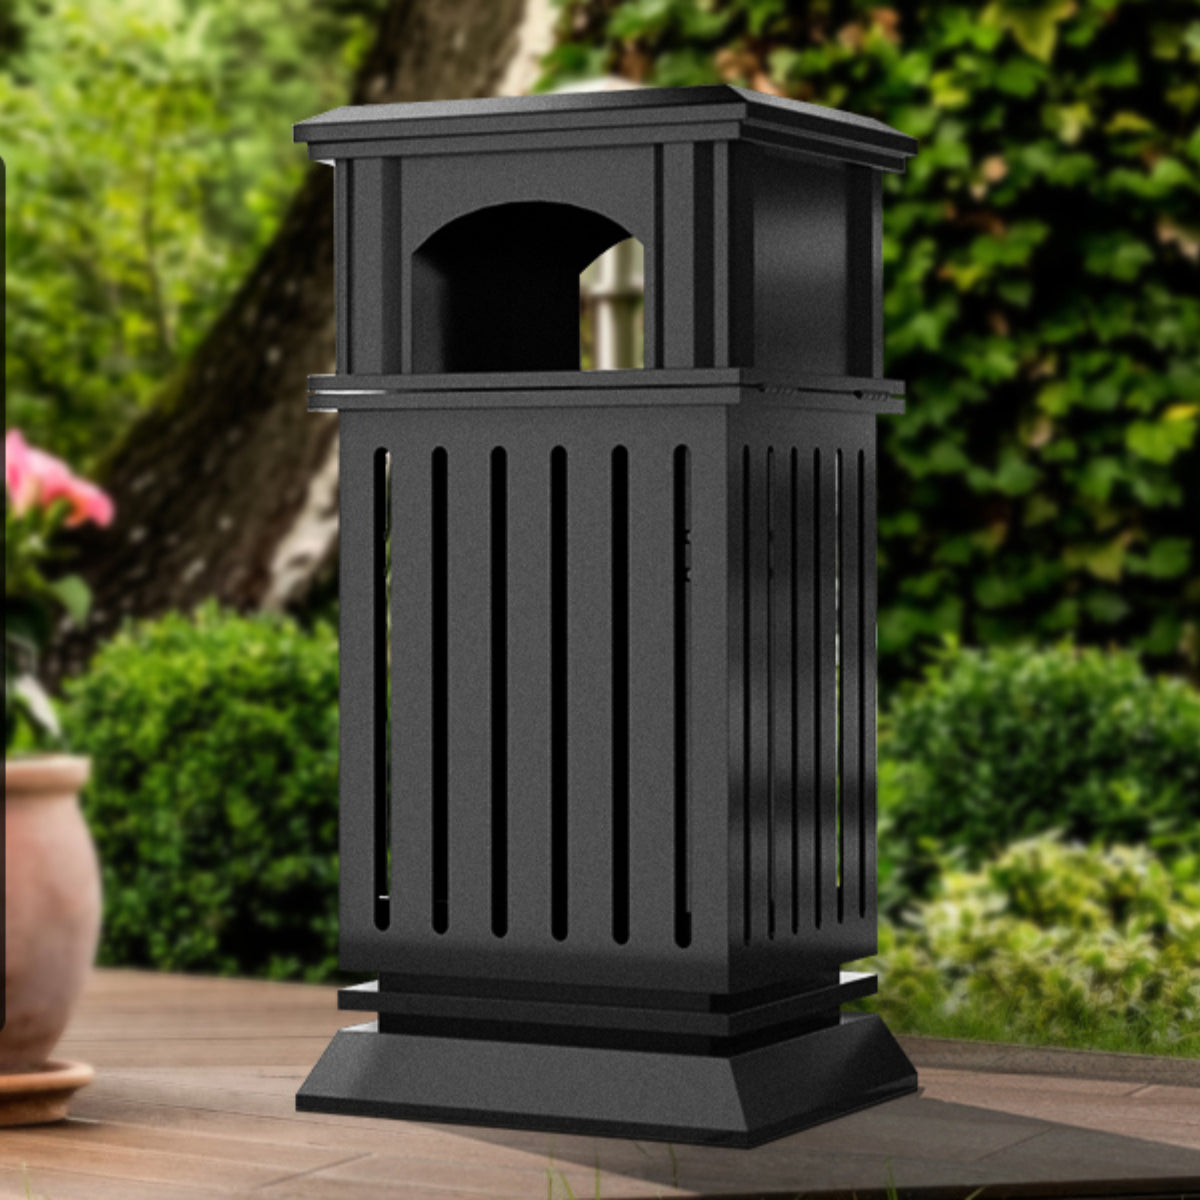 BEAMNOVA Trash Can Outdoor Top Tray Black Stainless Steel Commercial Garbage Enclosure with Locking Lid Heavy Duty Industrial Yard Garage Waste